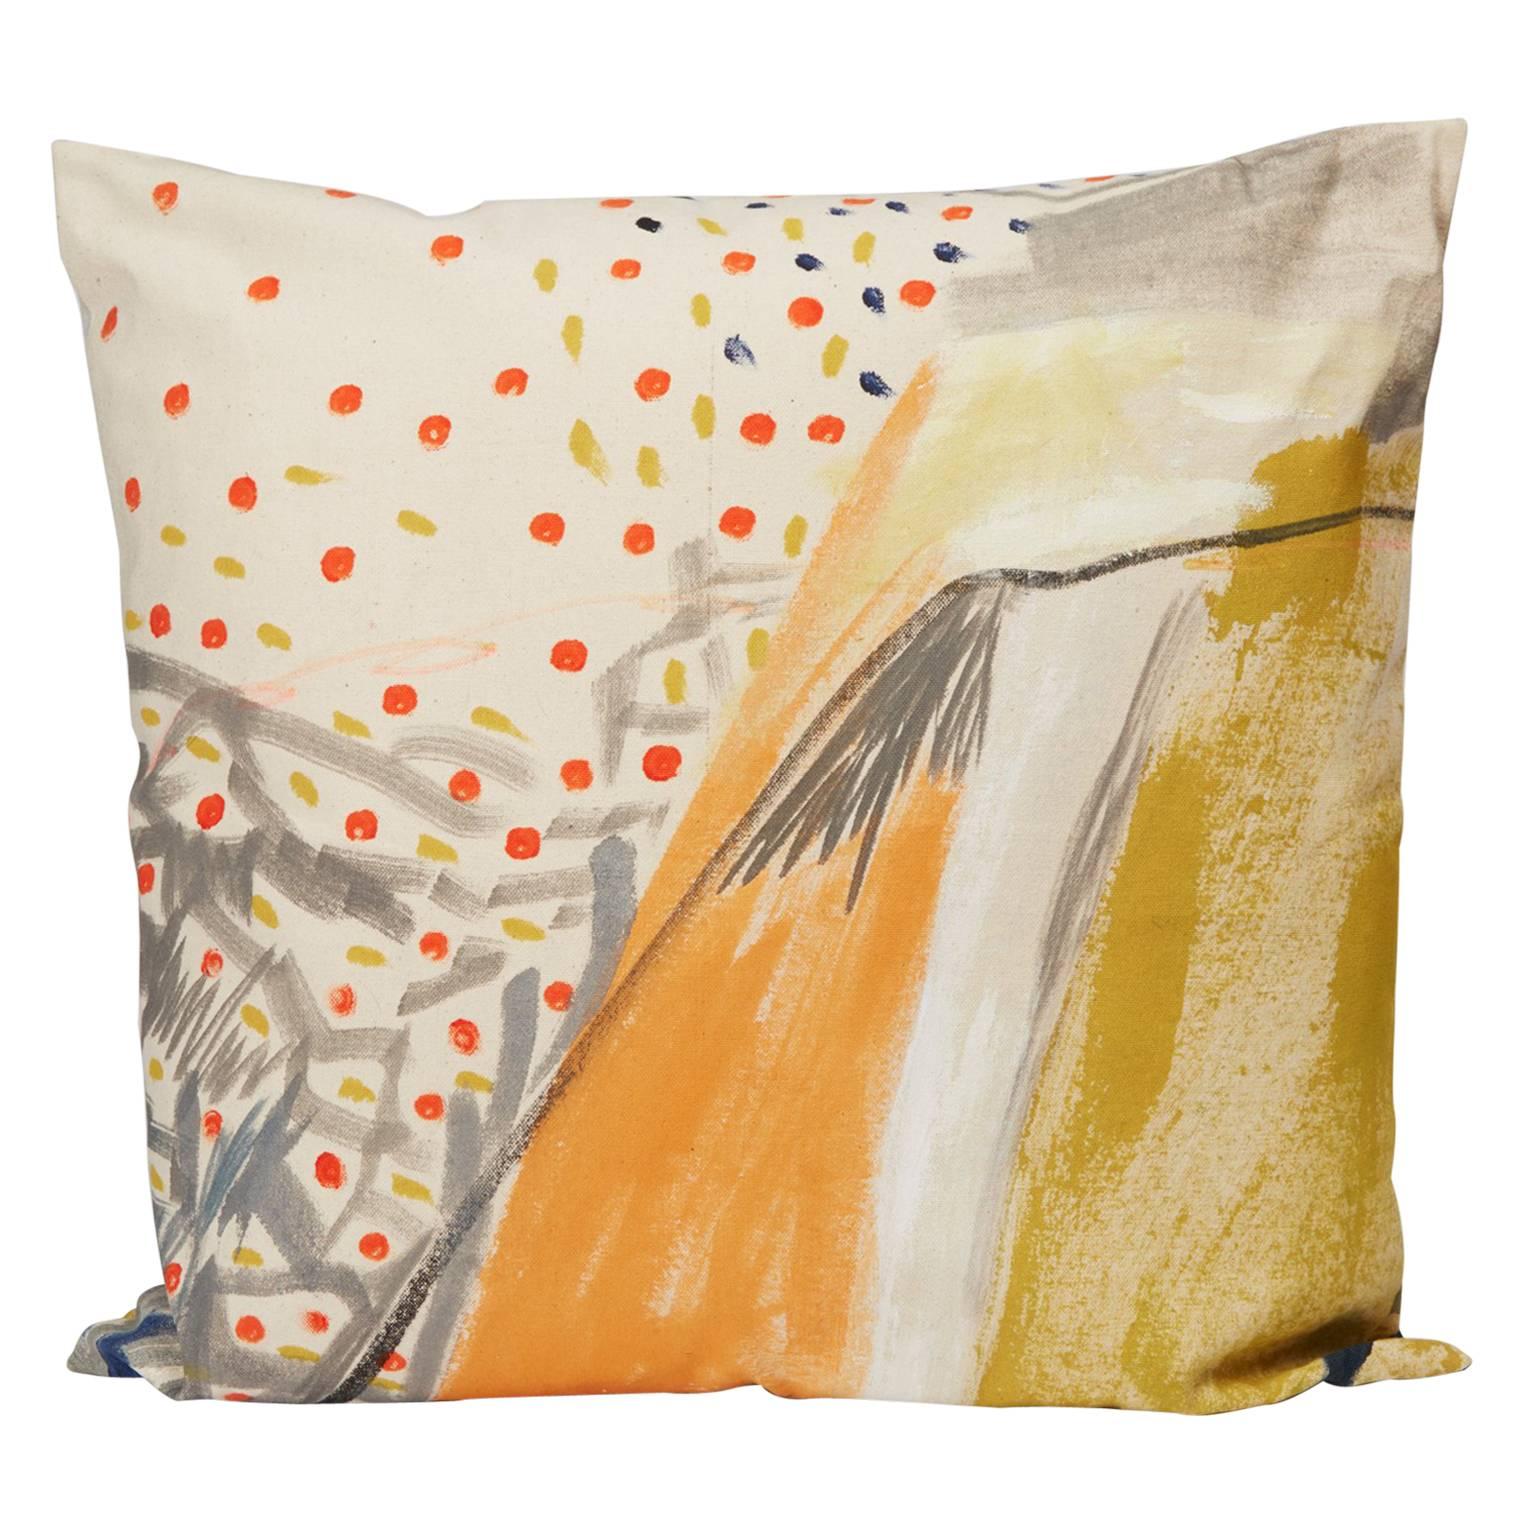 Multicolored Hand-Painted Canvas Square Pillow